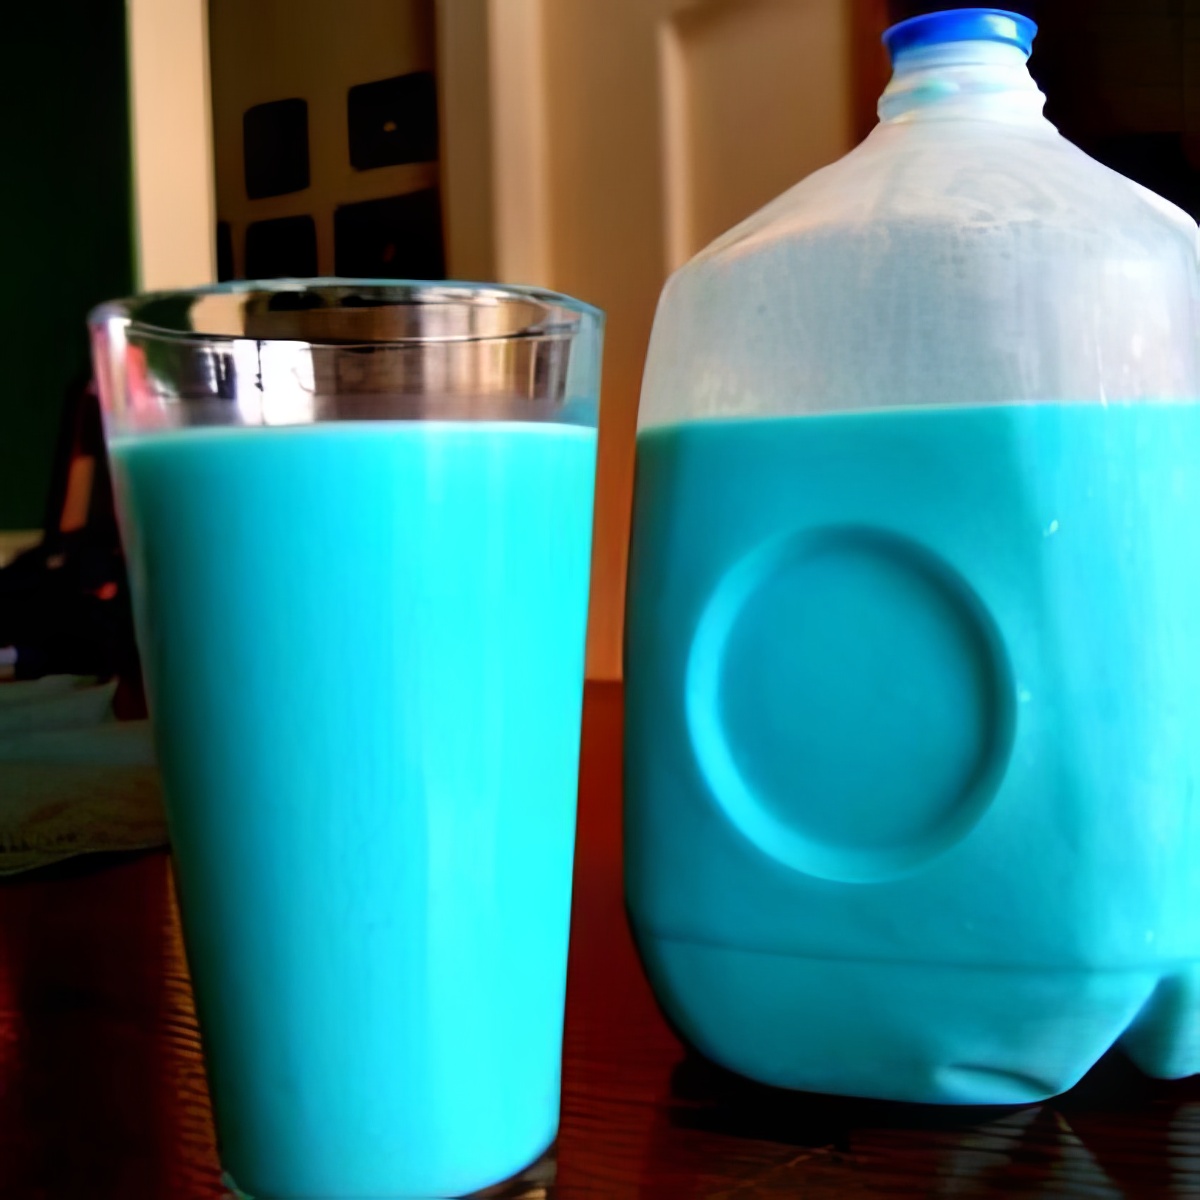 Turn that milk blue before your kids wake up!